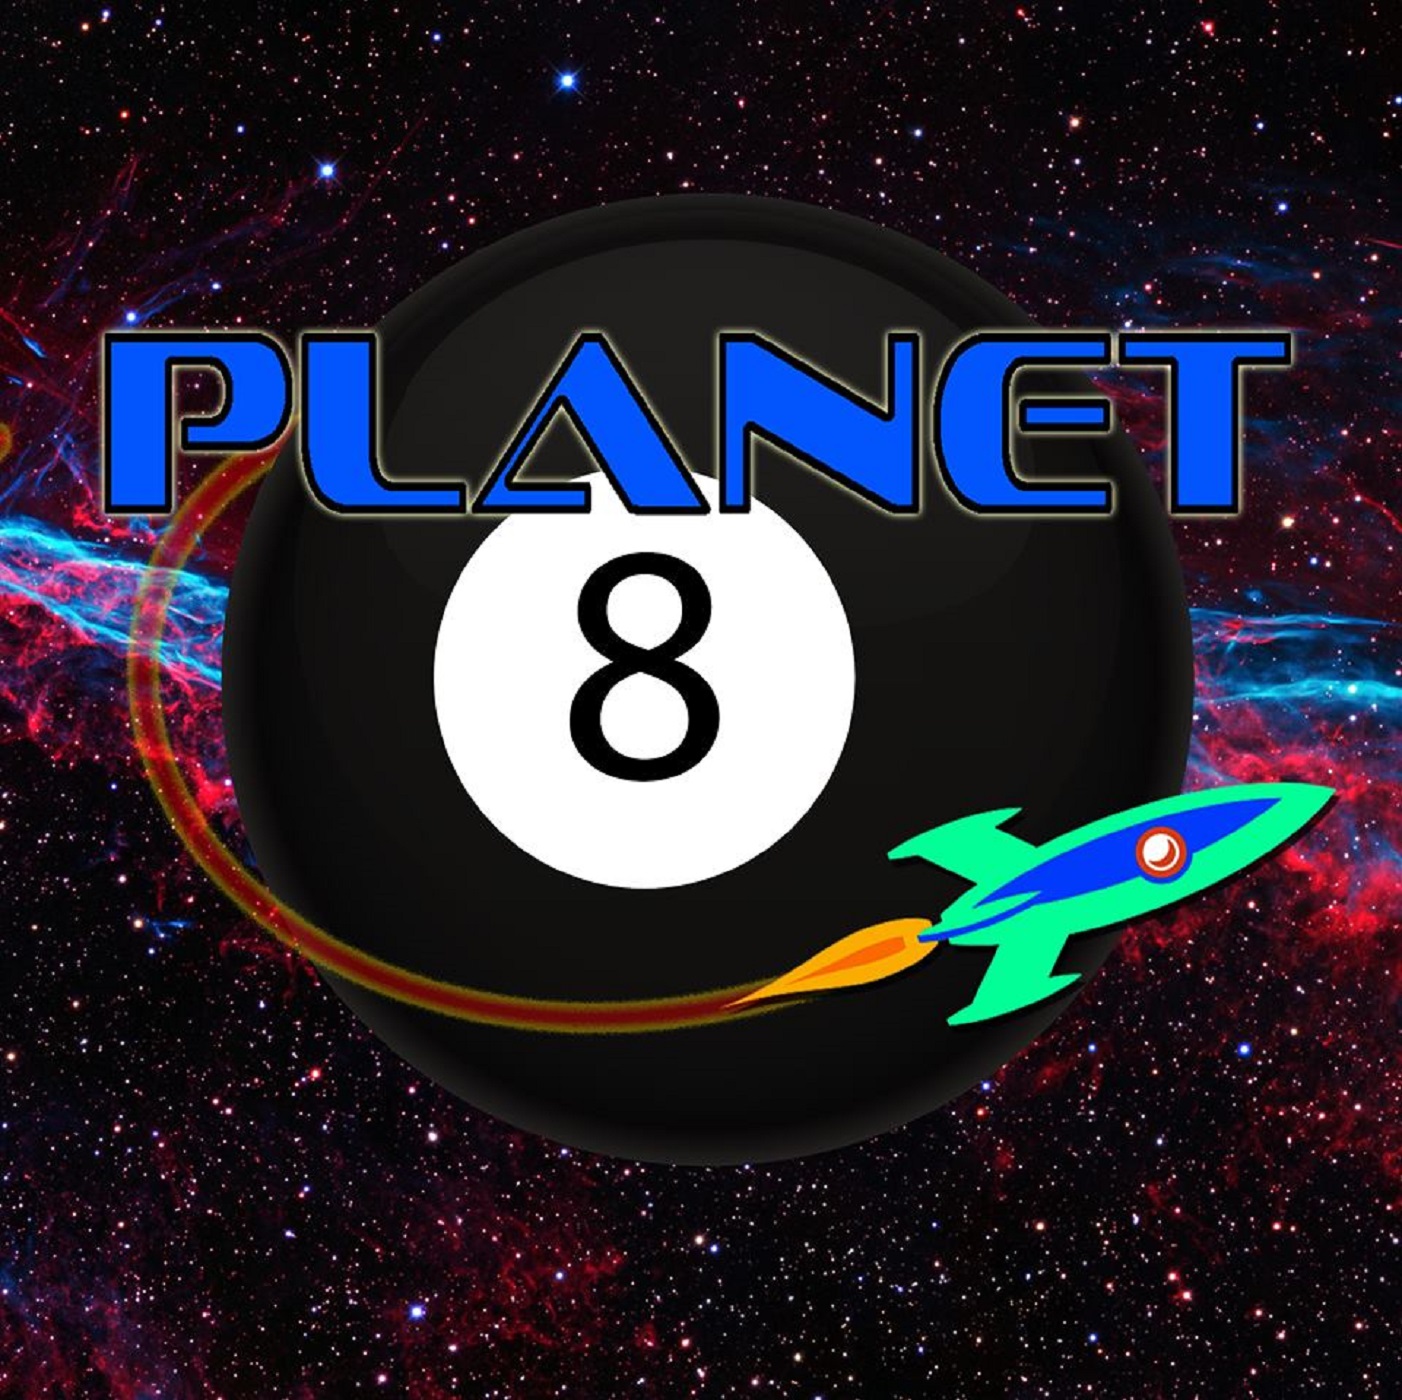 Planet 8 Podcast